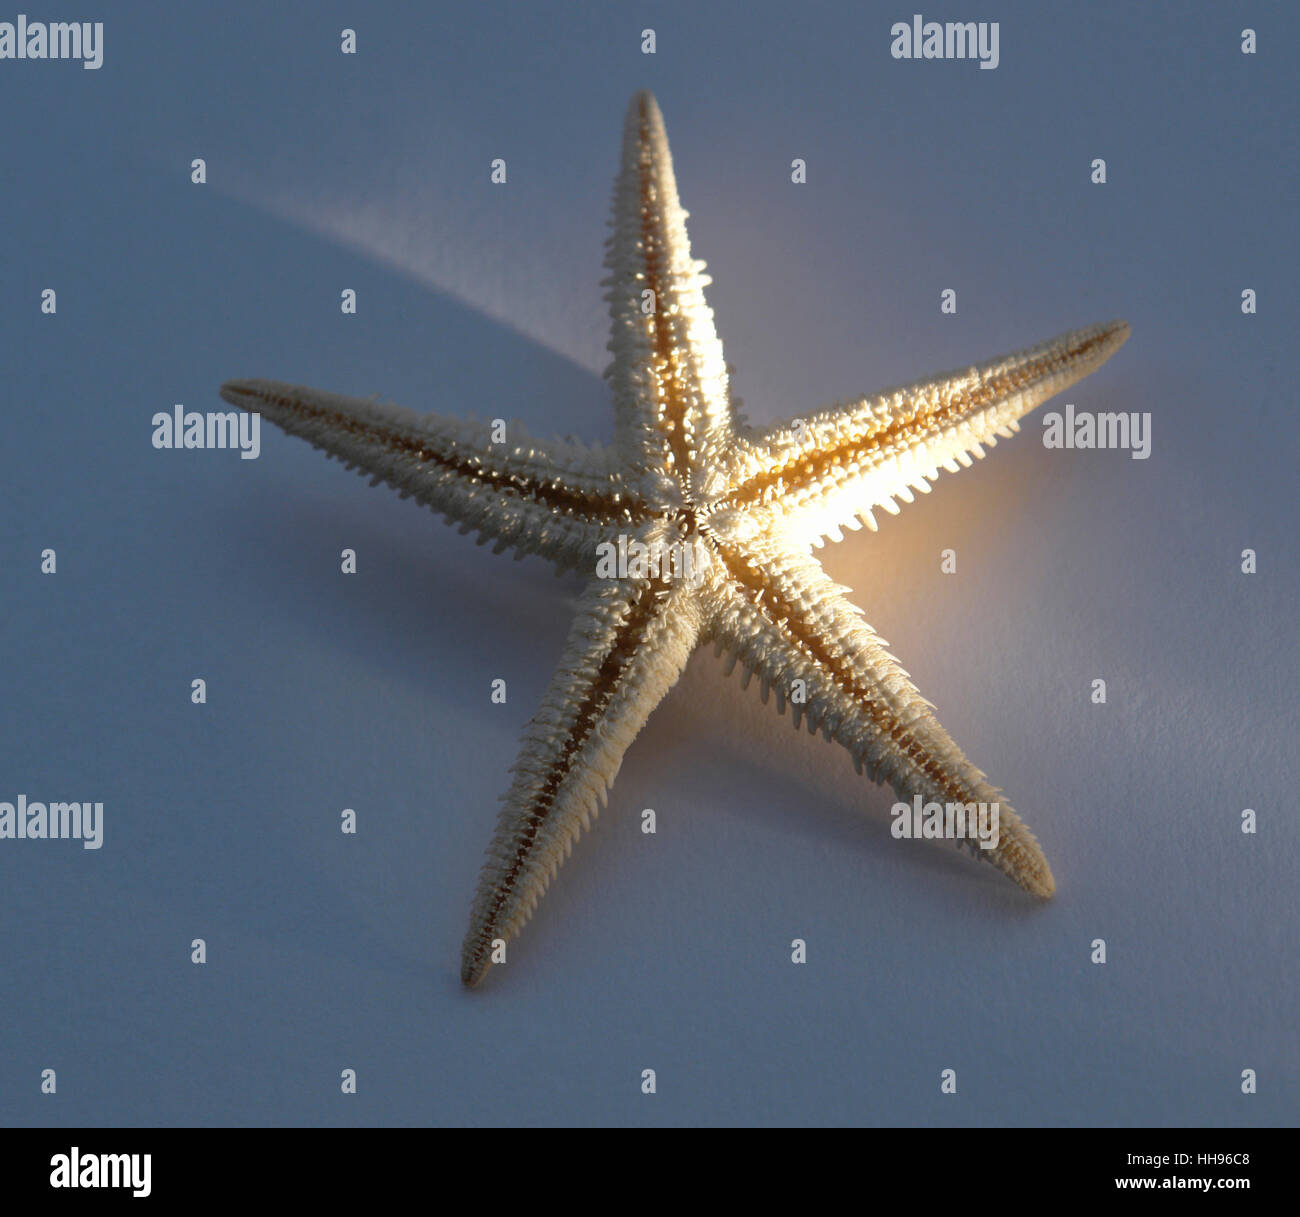 decorative starfish in blue back with streak of light Stock Photo